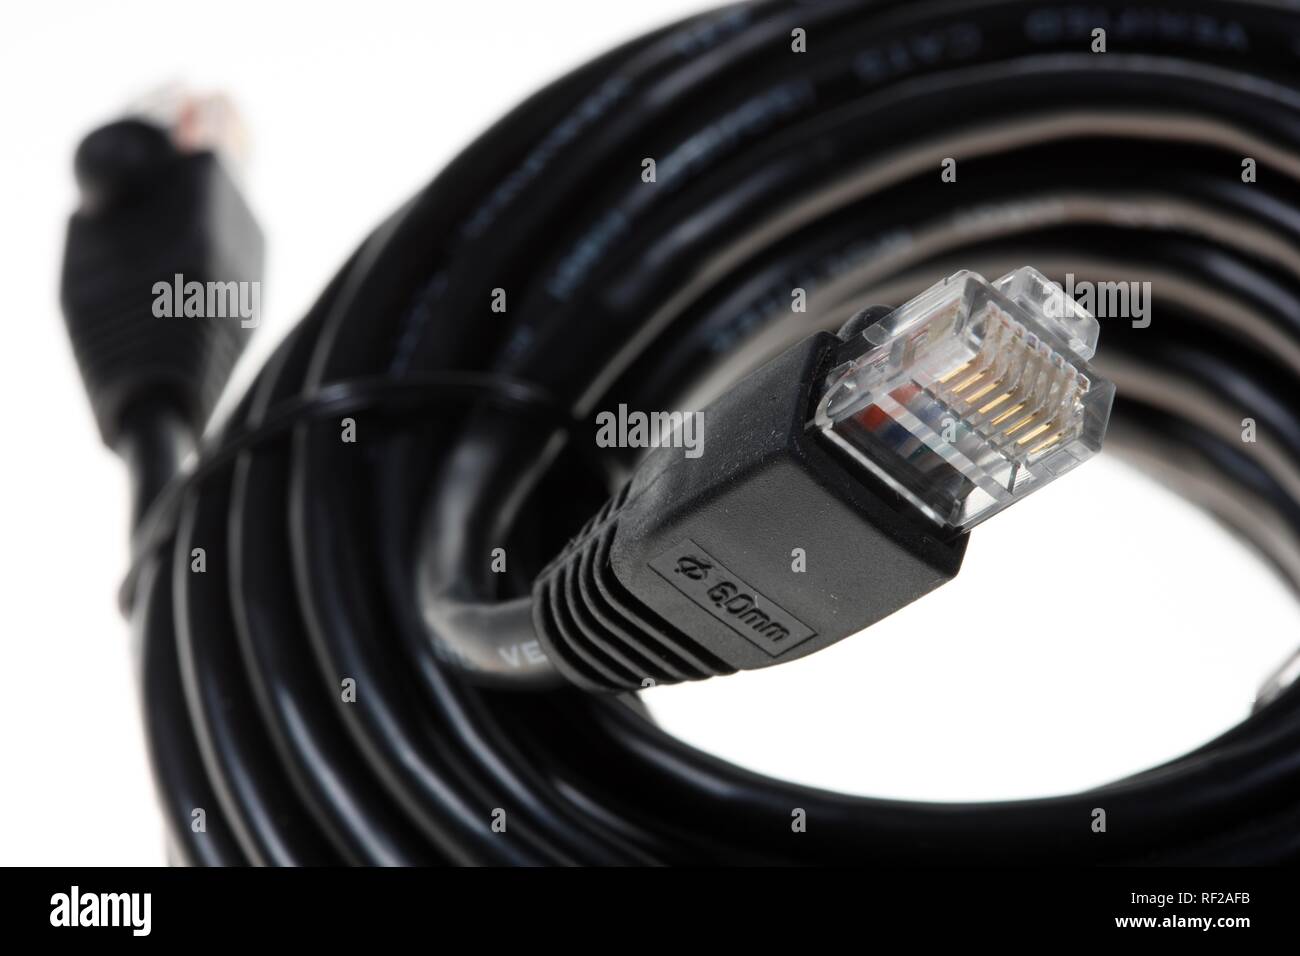 Coiled computer network cables used to connect to an internal or external network, internet connection, broadband connection Stock Photo